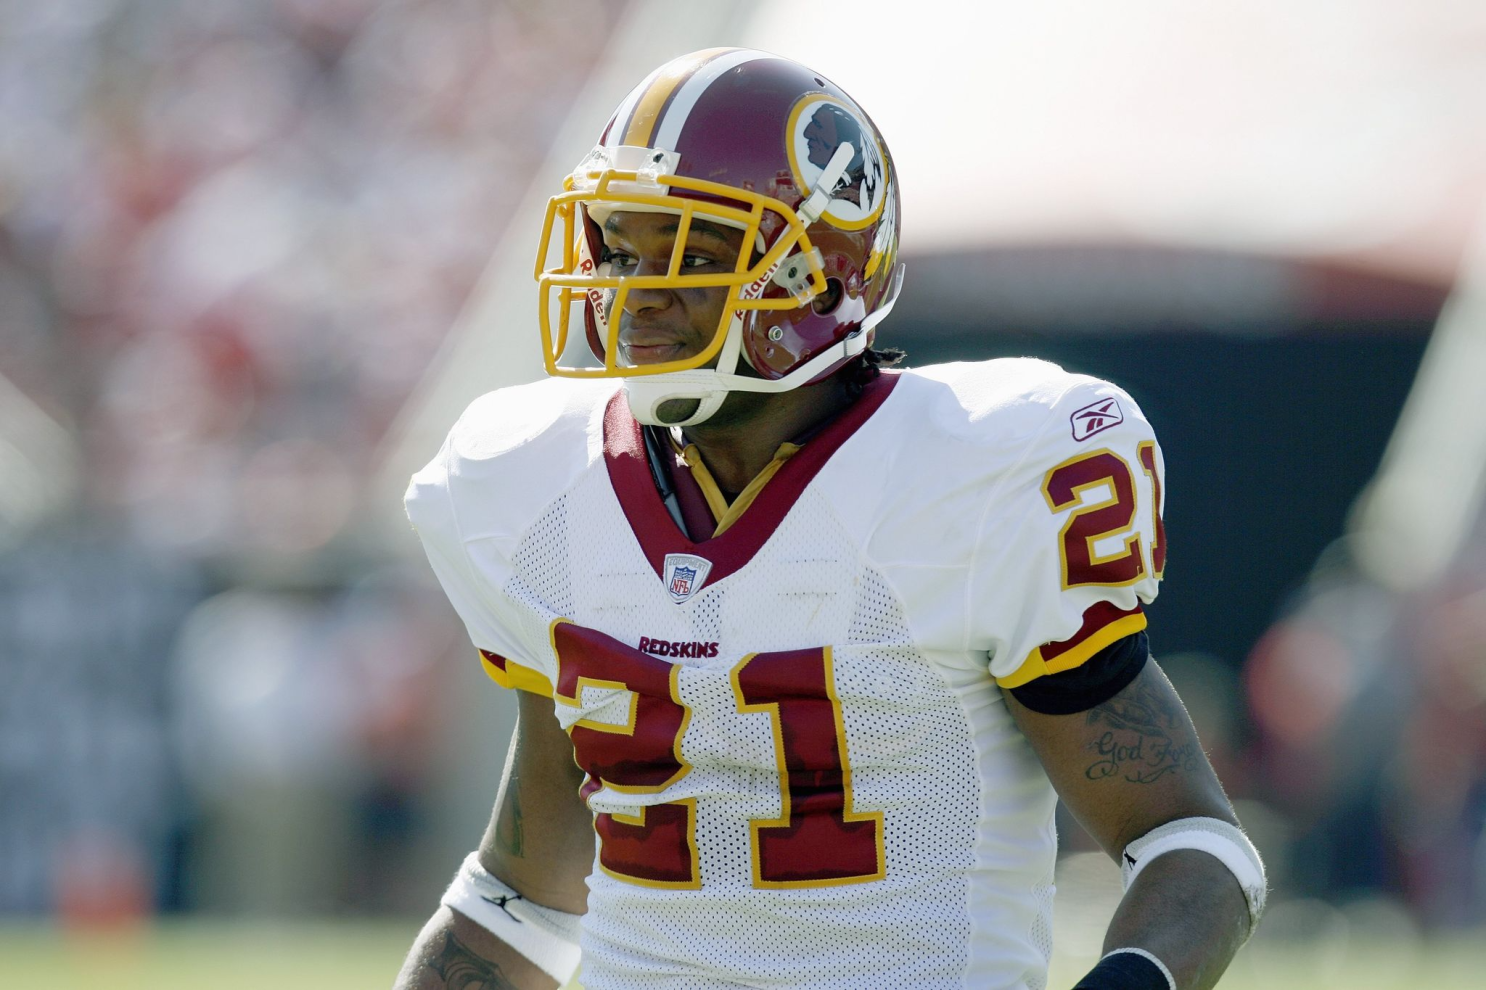 Remembering Sean Taylor's life, impact on NFL